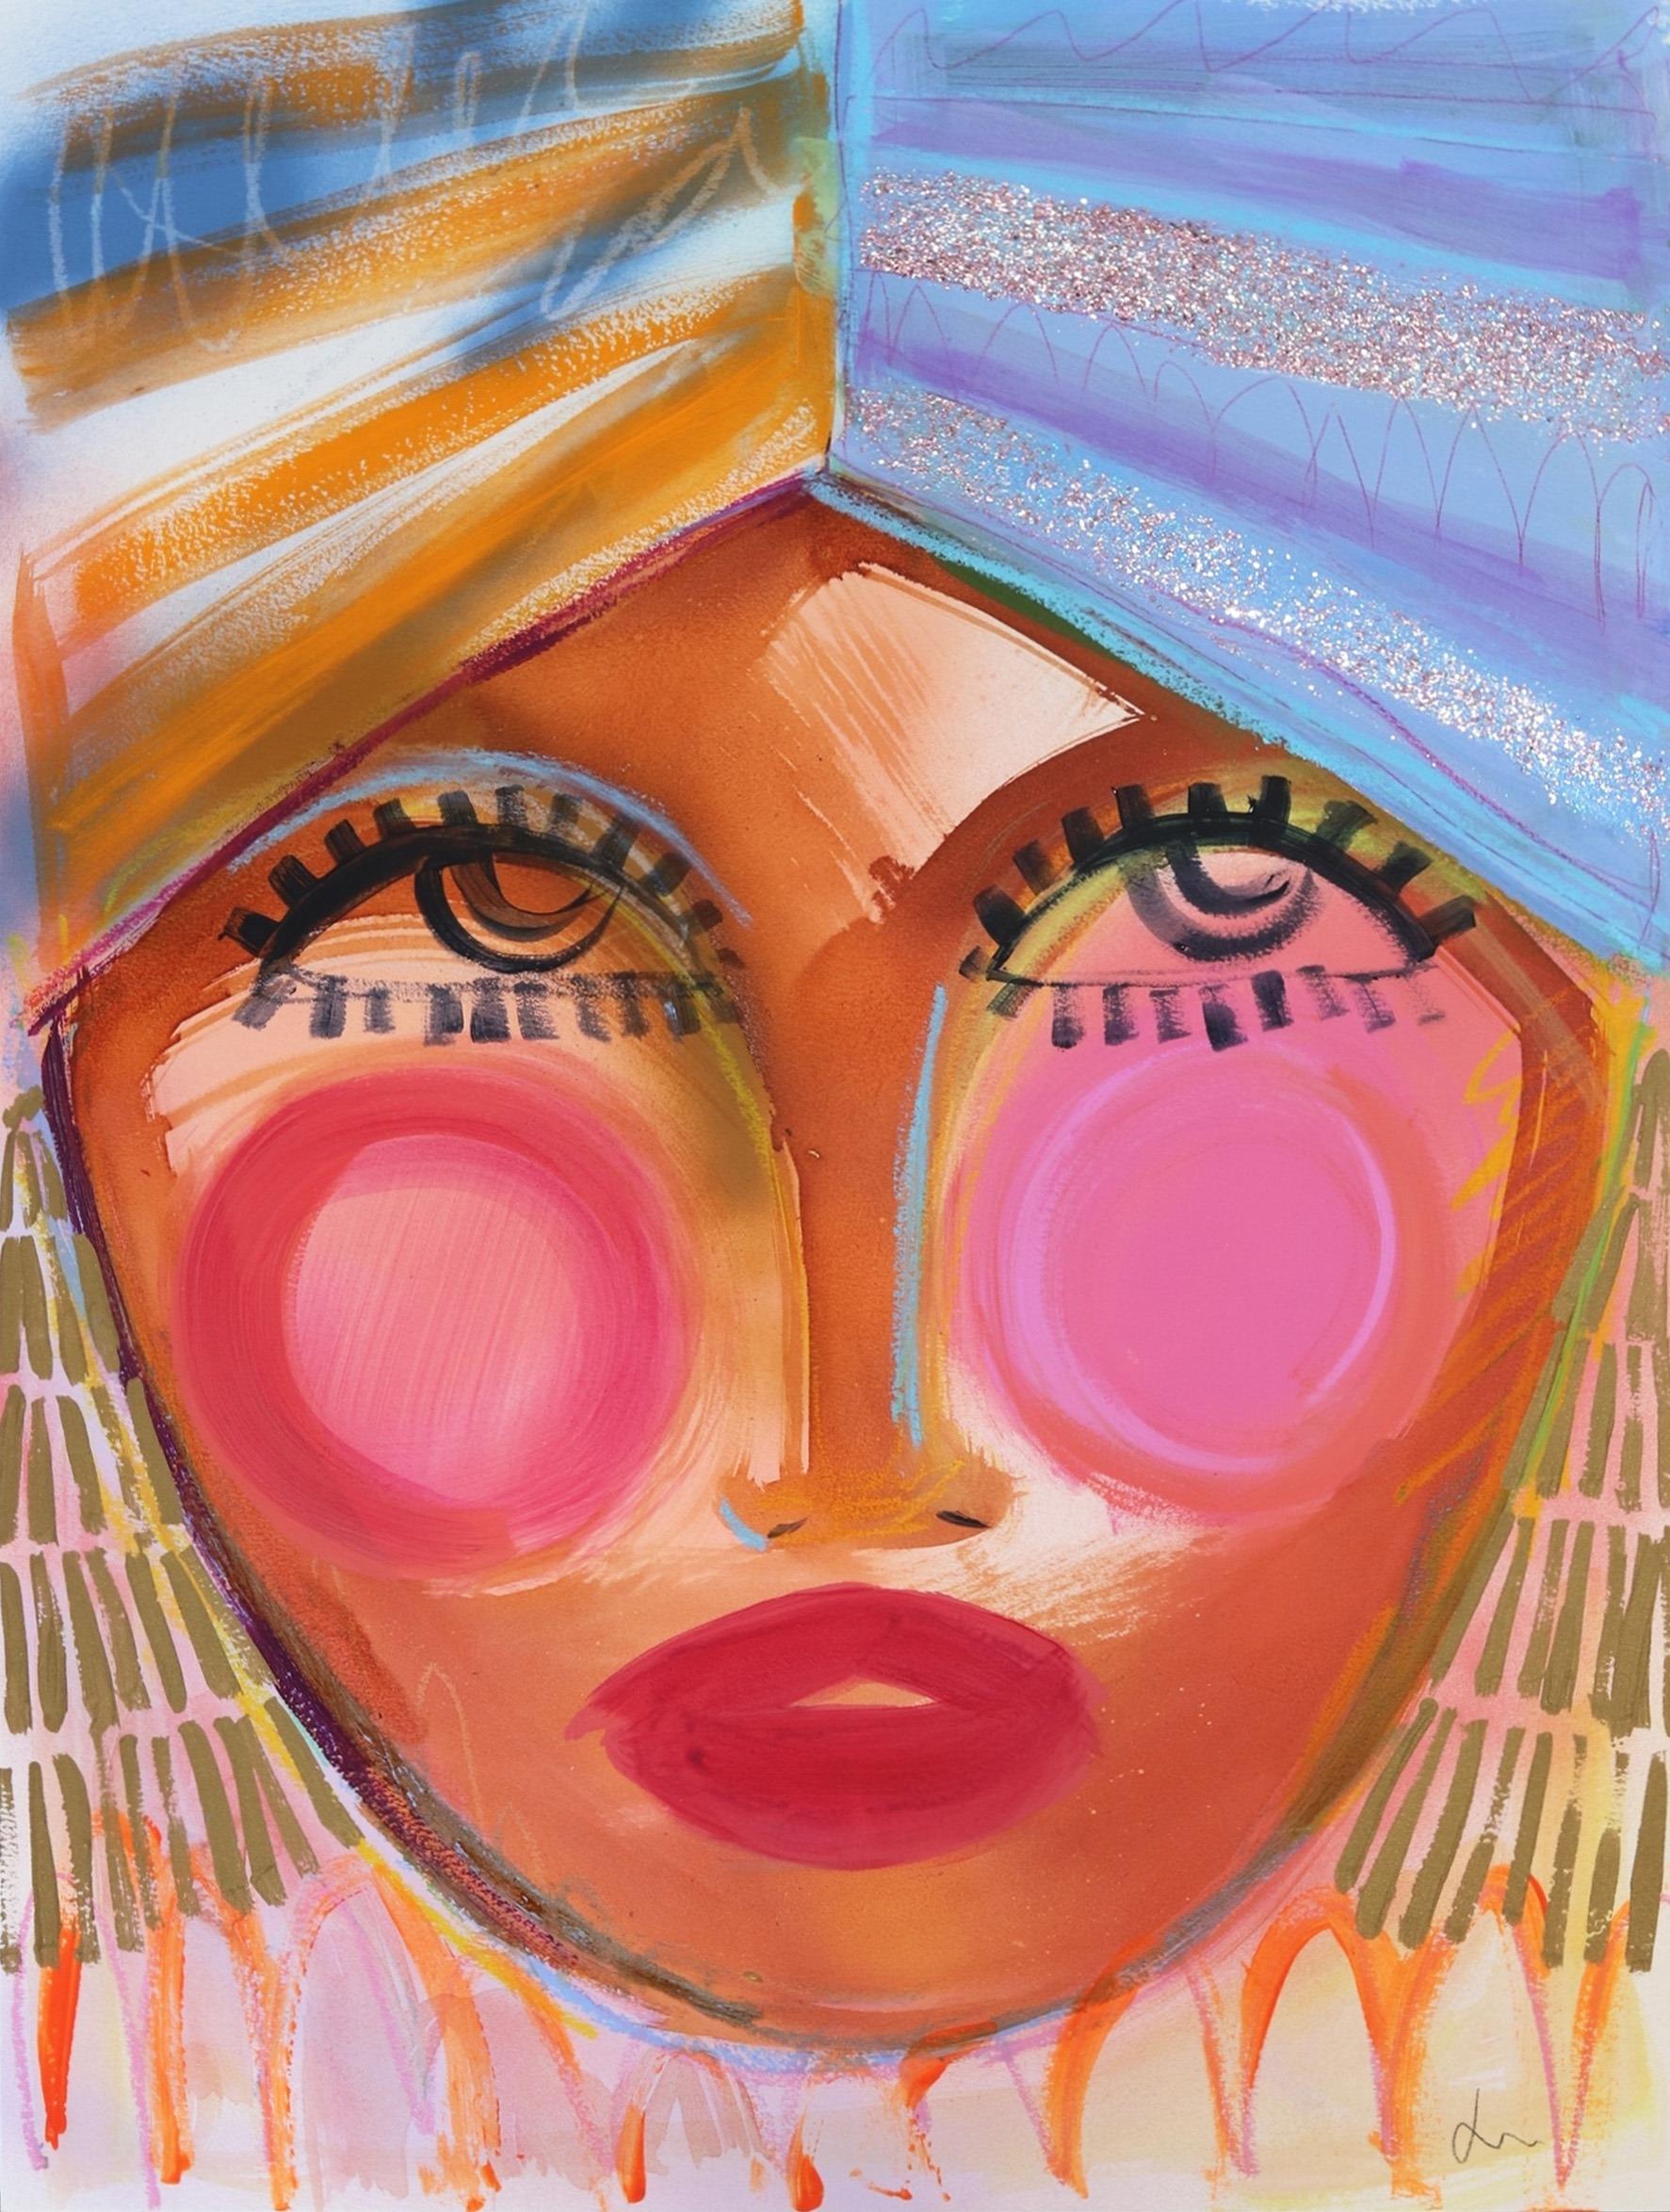 Selena - Colorful Abstract Figurative Portrait Original Painting